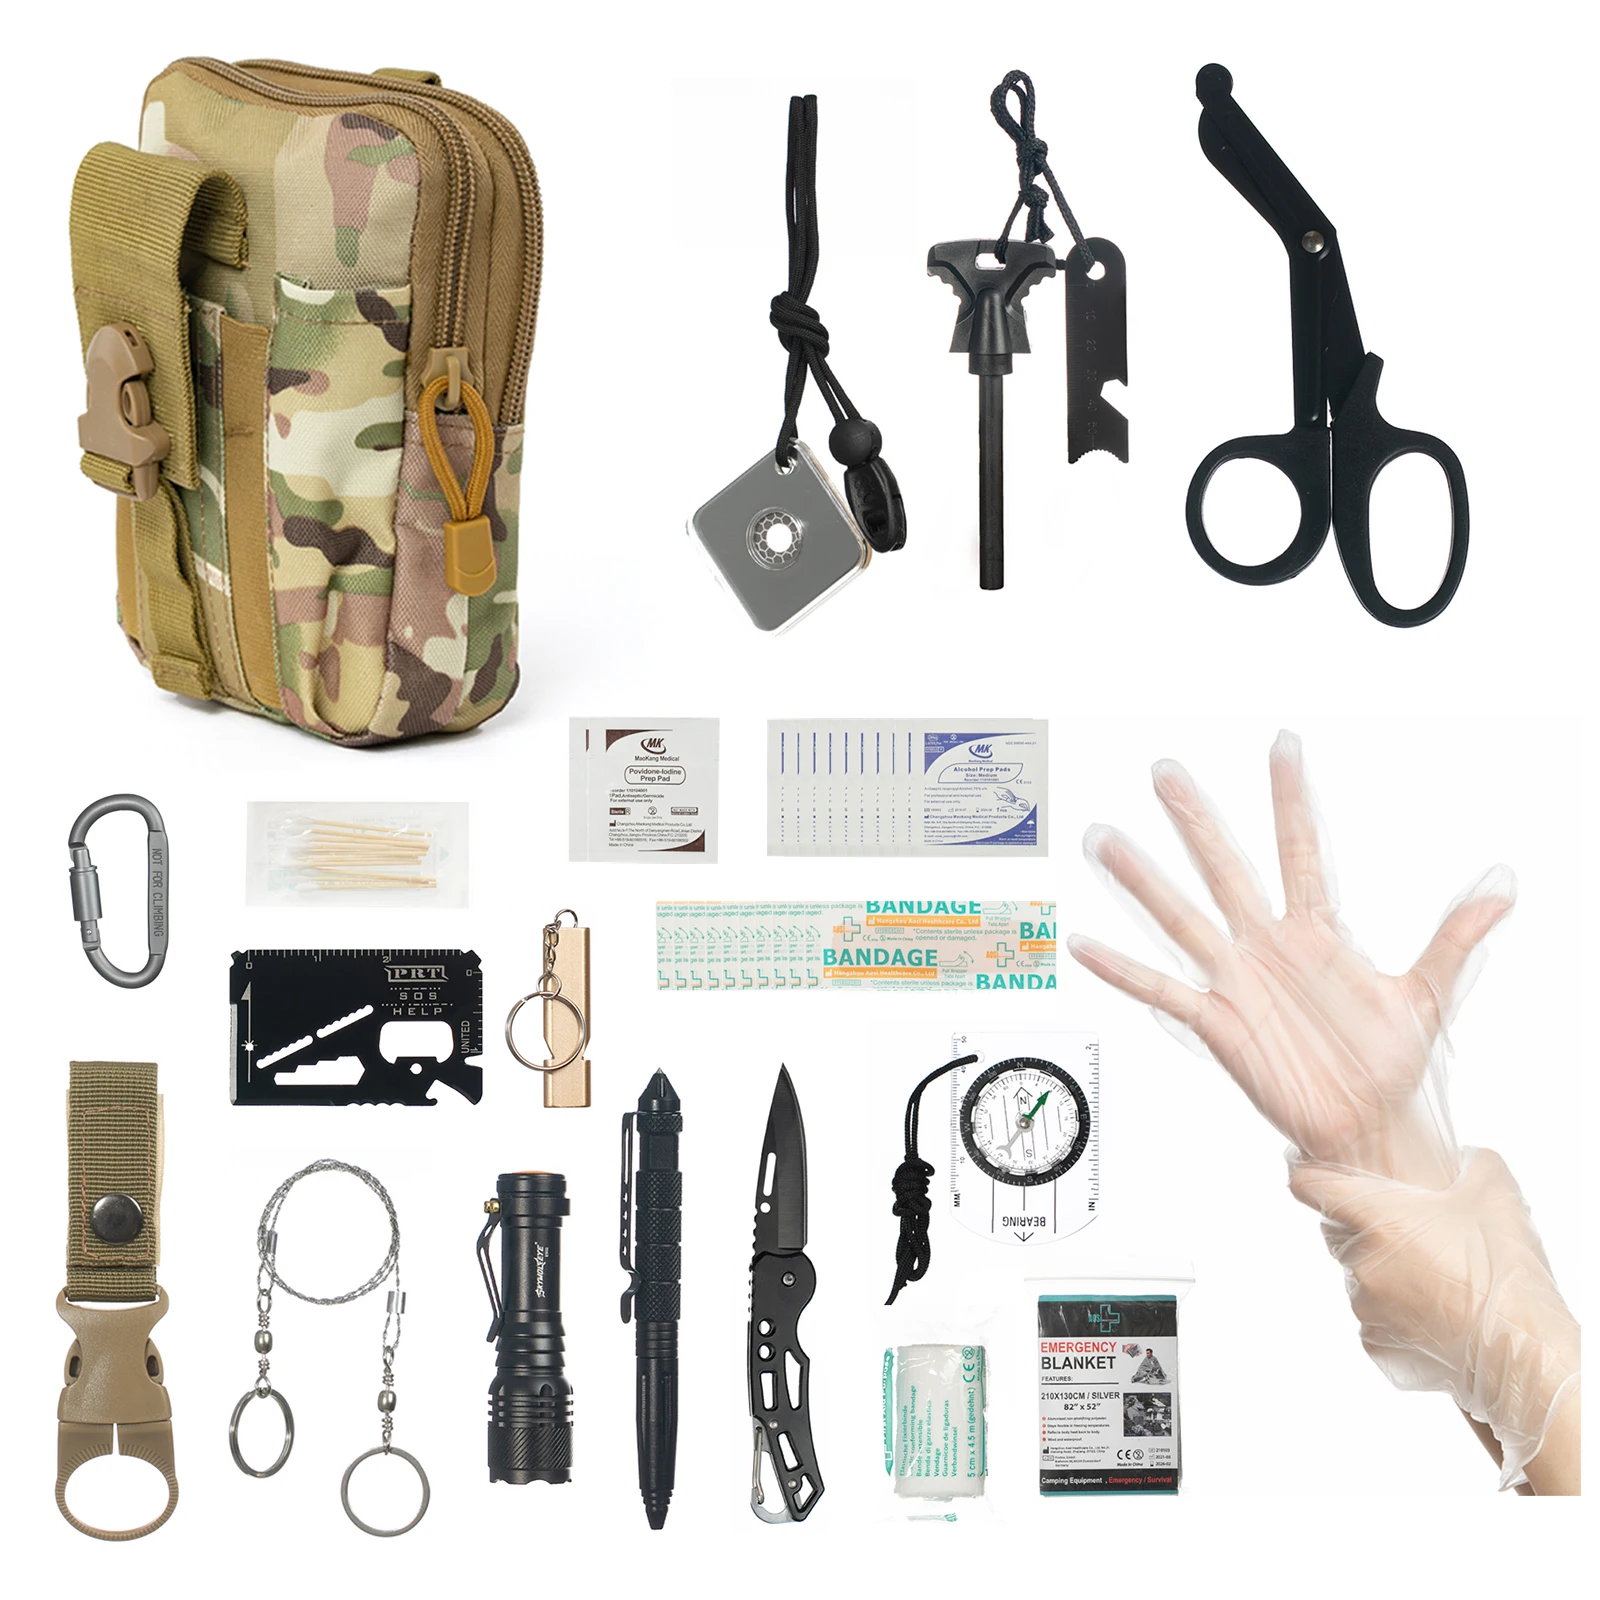 Emergency Survival Kit, First Aid Kit Professional Survival Gear Tool with IFAK Molle System Compatible Bag, Gift